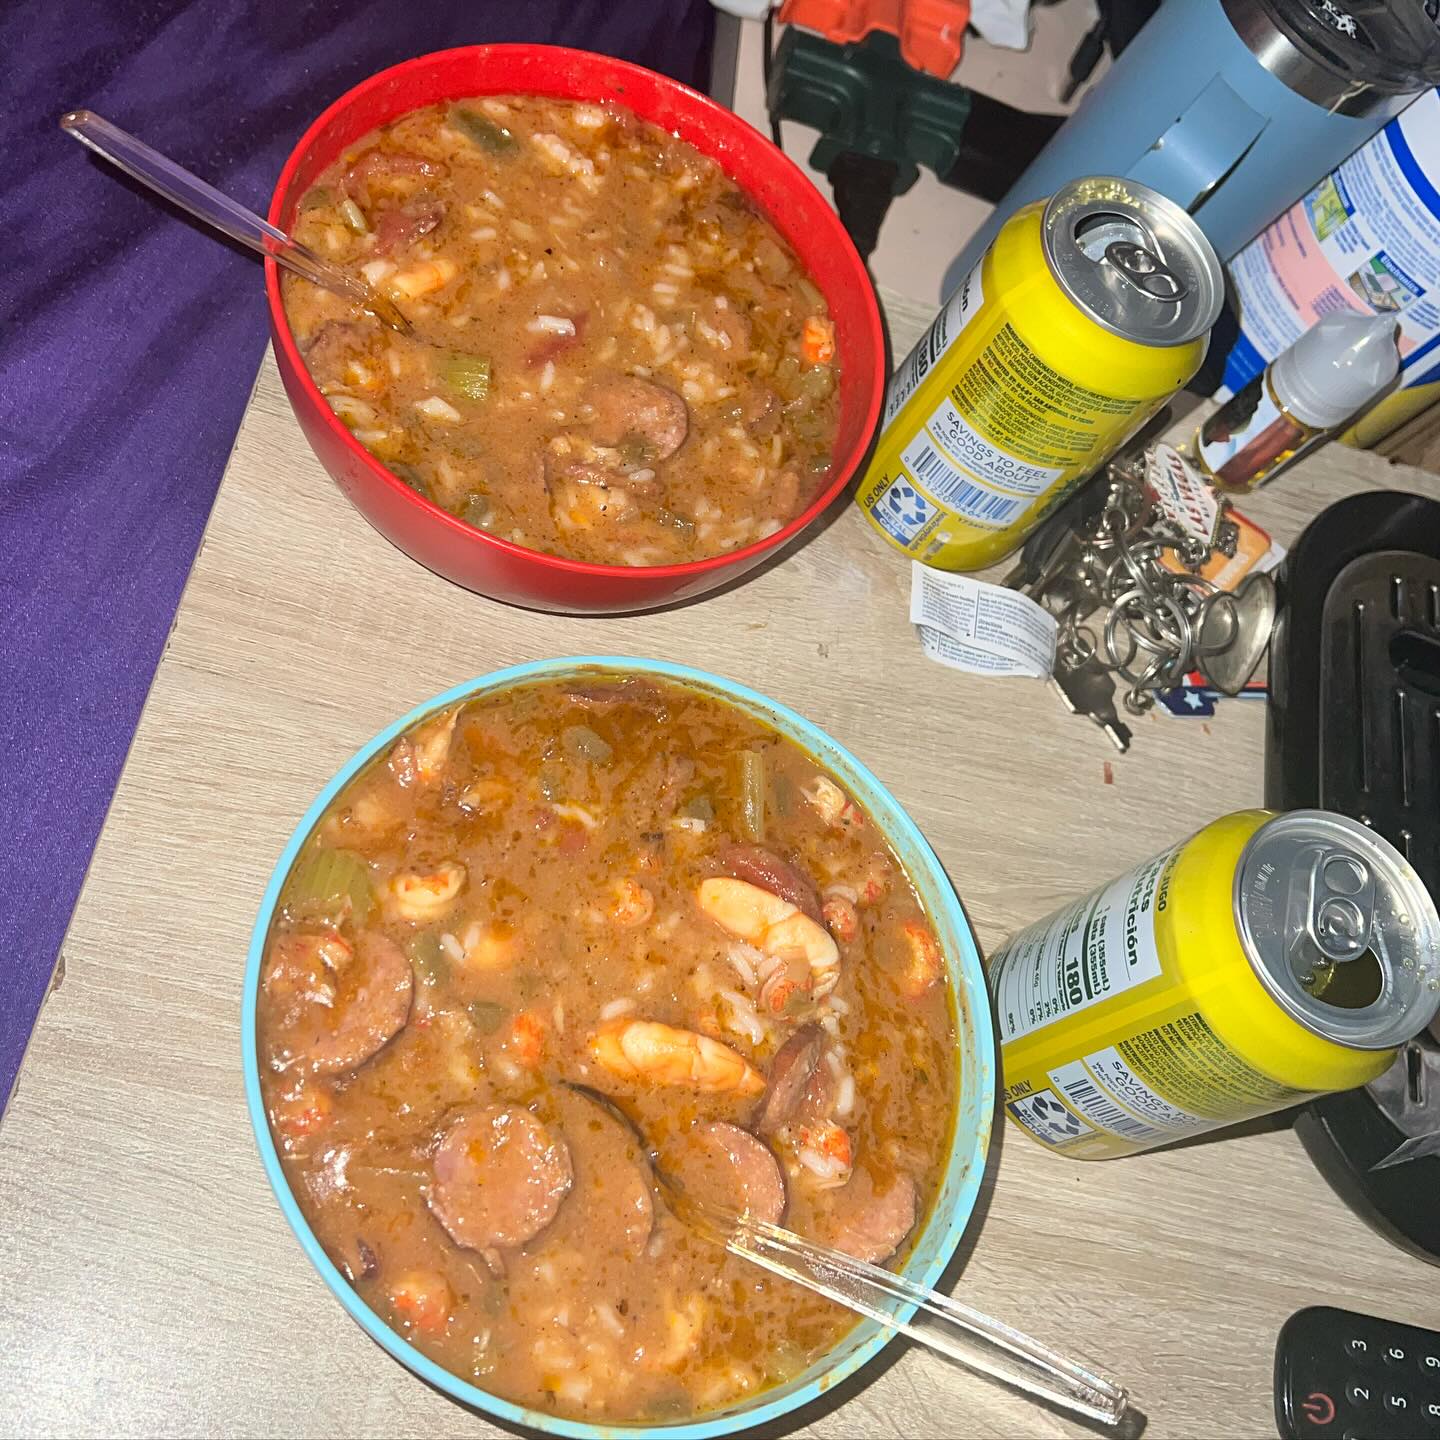 Seafood 🦞 Gumbo I made yesterday on the grill for everybody it turned out amazing definitely wanna try out many more recipes